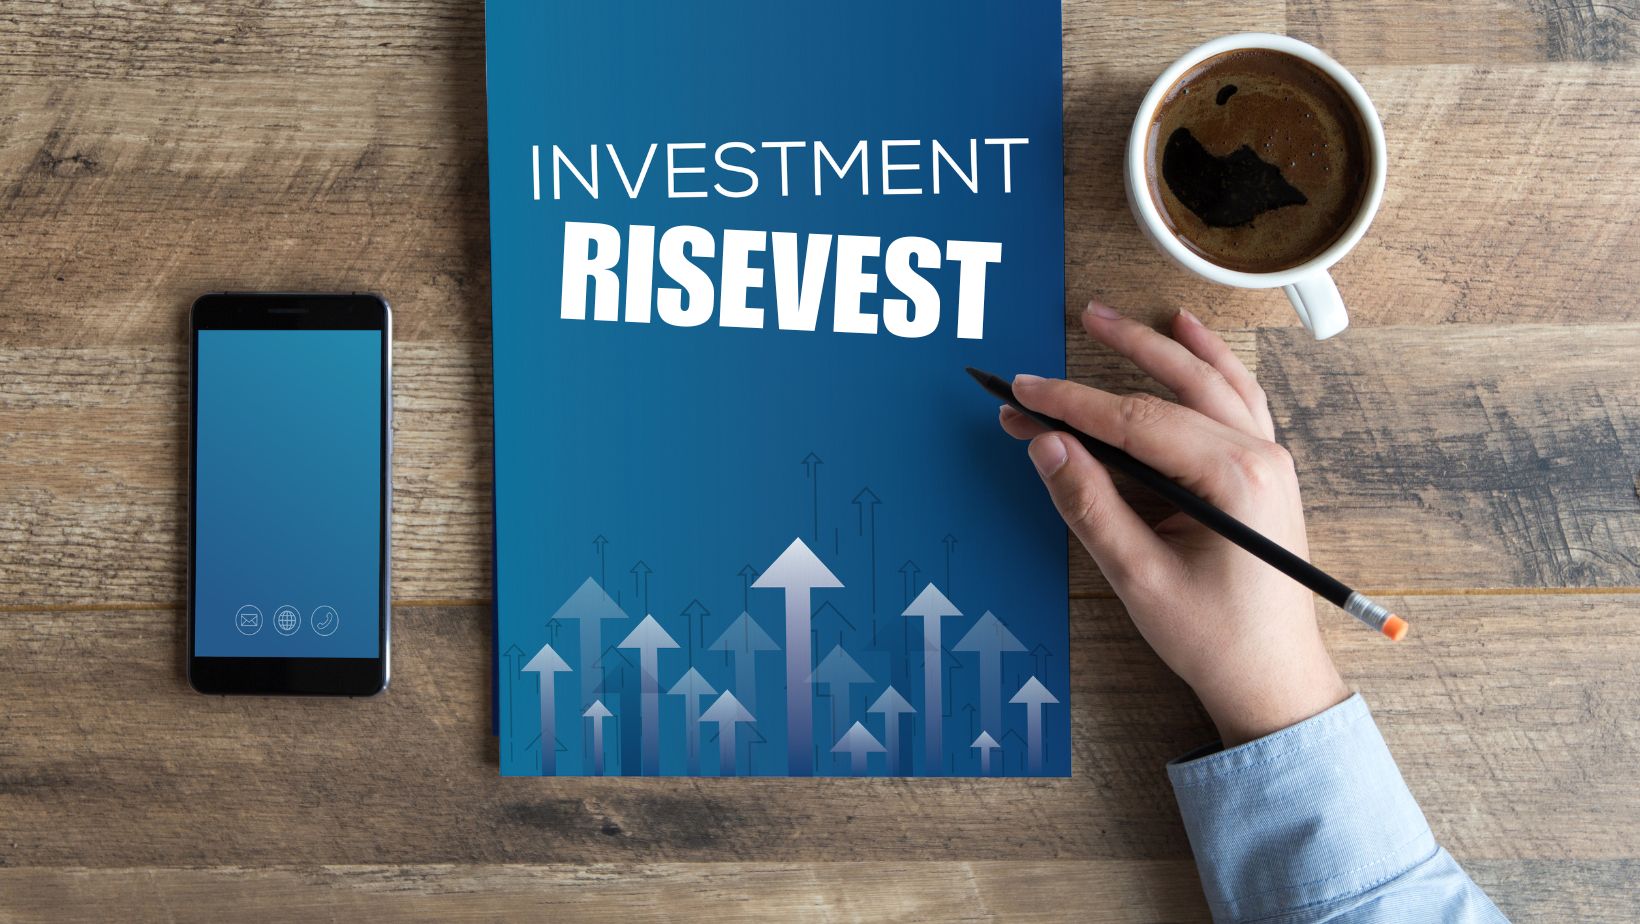 Risevest: How to Use, Dollar Investment, Stocks & More